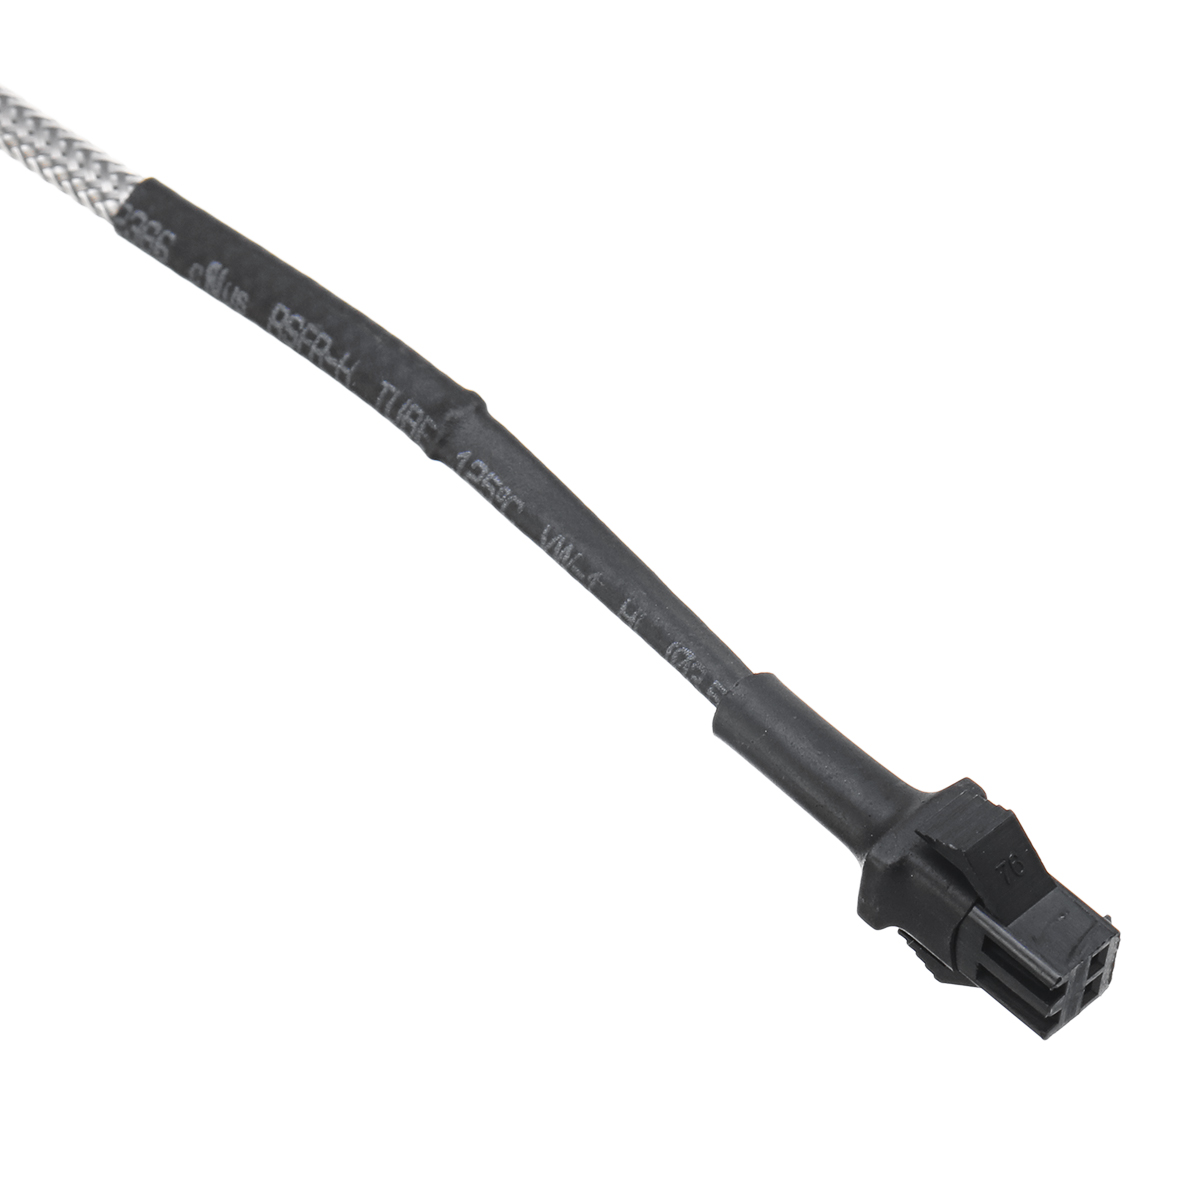 New Replacement Meat Temperature Probe Sensor For Pit Boss